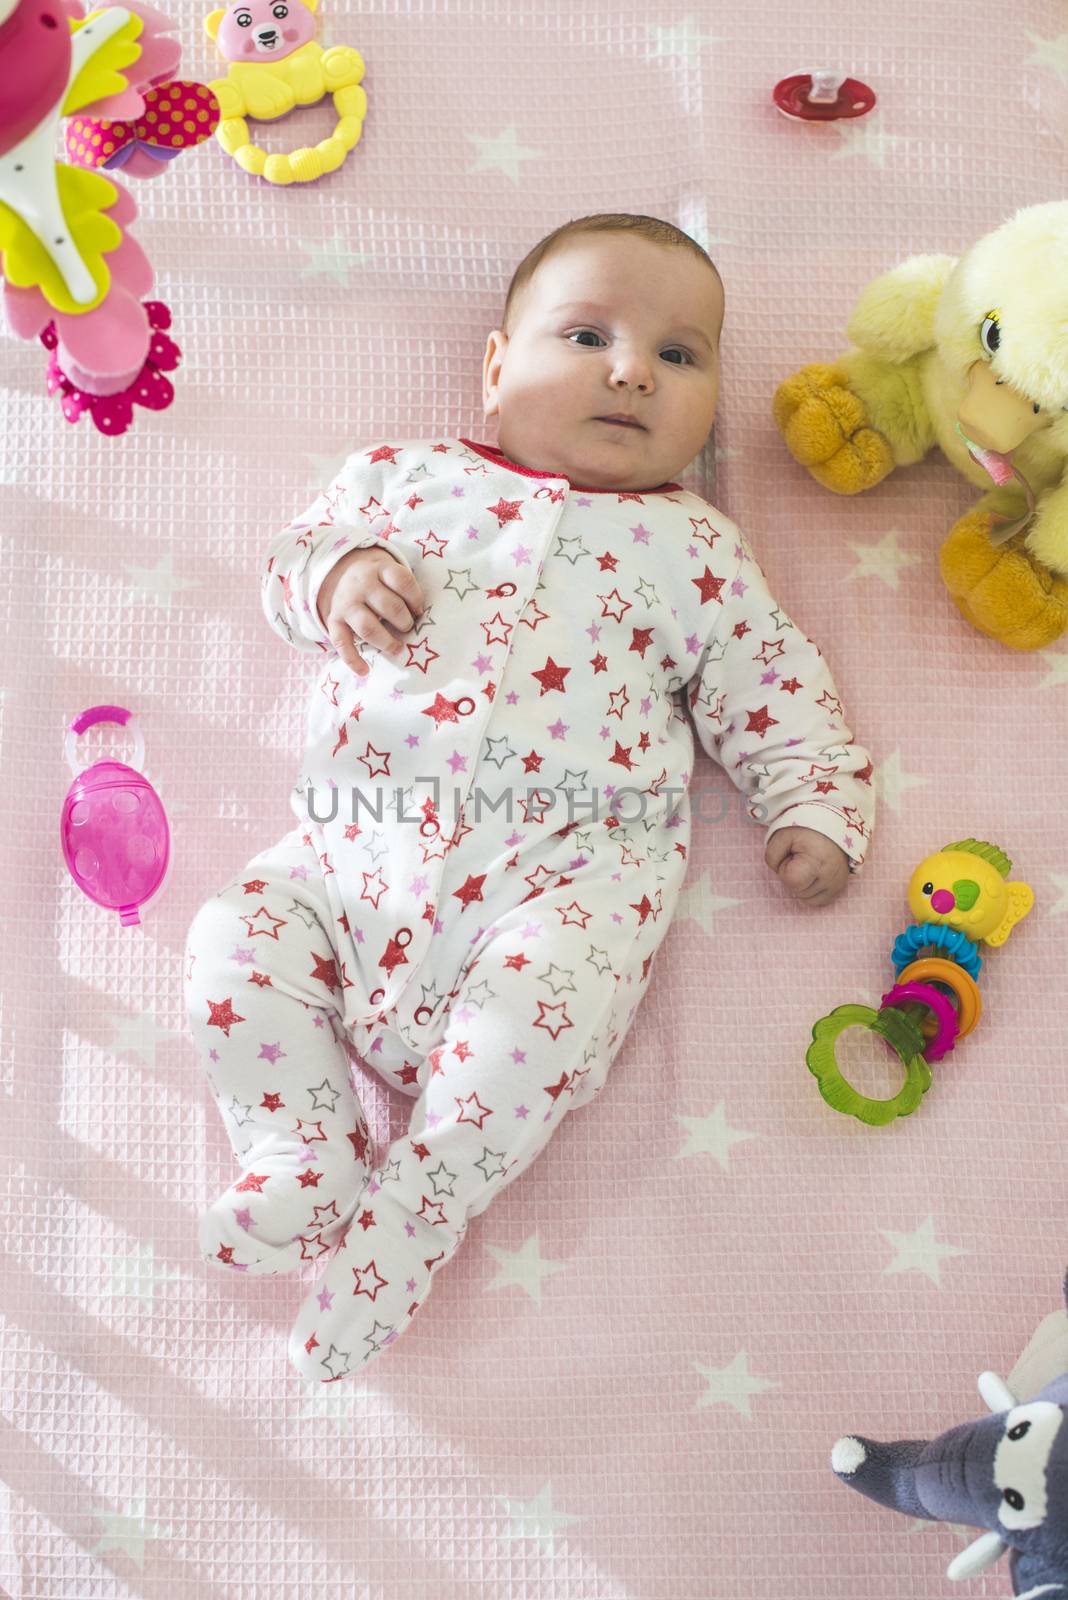 Baby girl in a bed with toys around. Pink tones